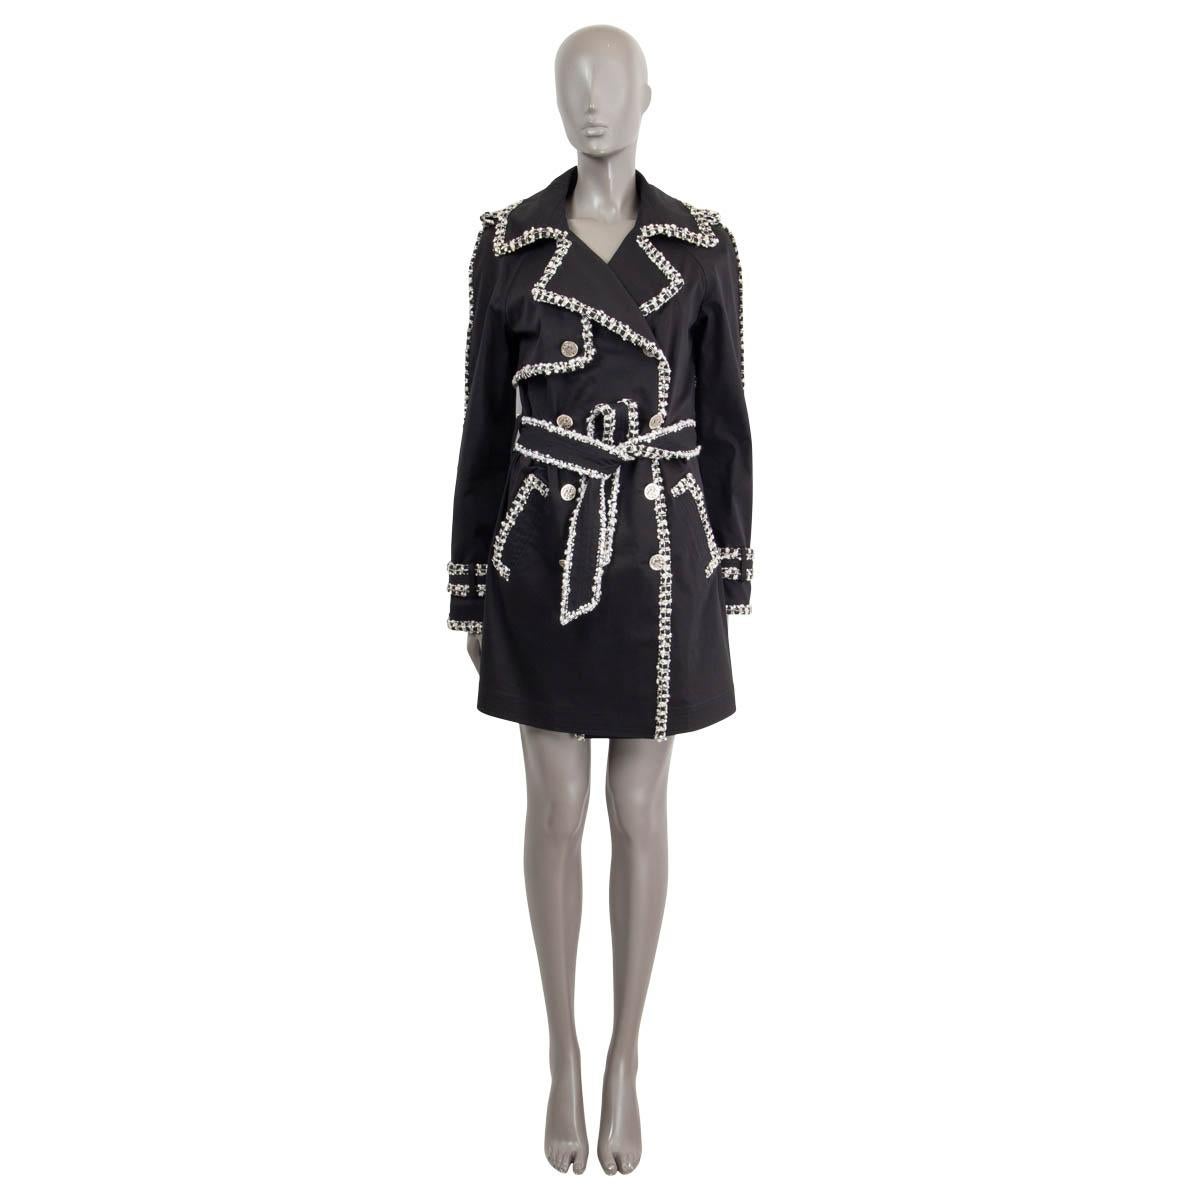 100% authentic Chanel double breasted trench coat in black cotton (95%) and polyurethane (5%) embellished with signature braided bouclé and sequin trim in white and light grey. The design features two front pockets, a waist belt, epaulette on the